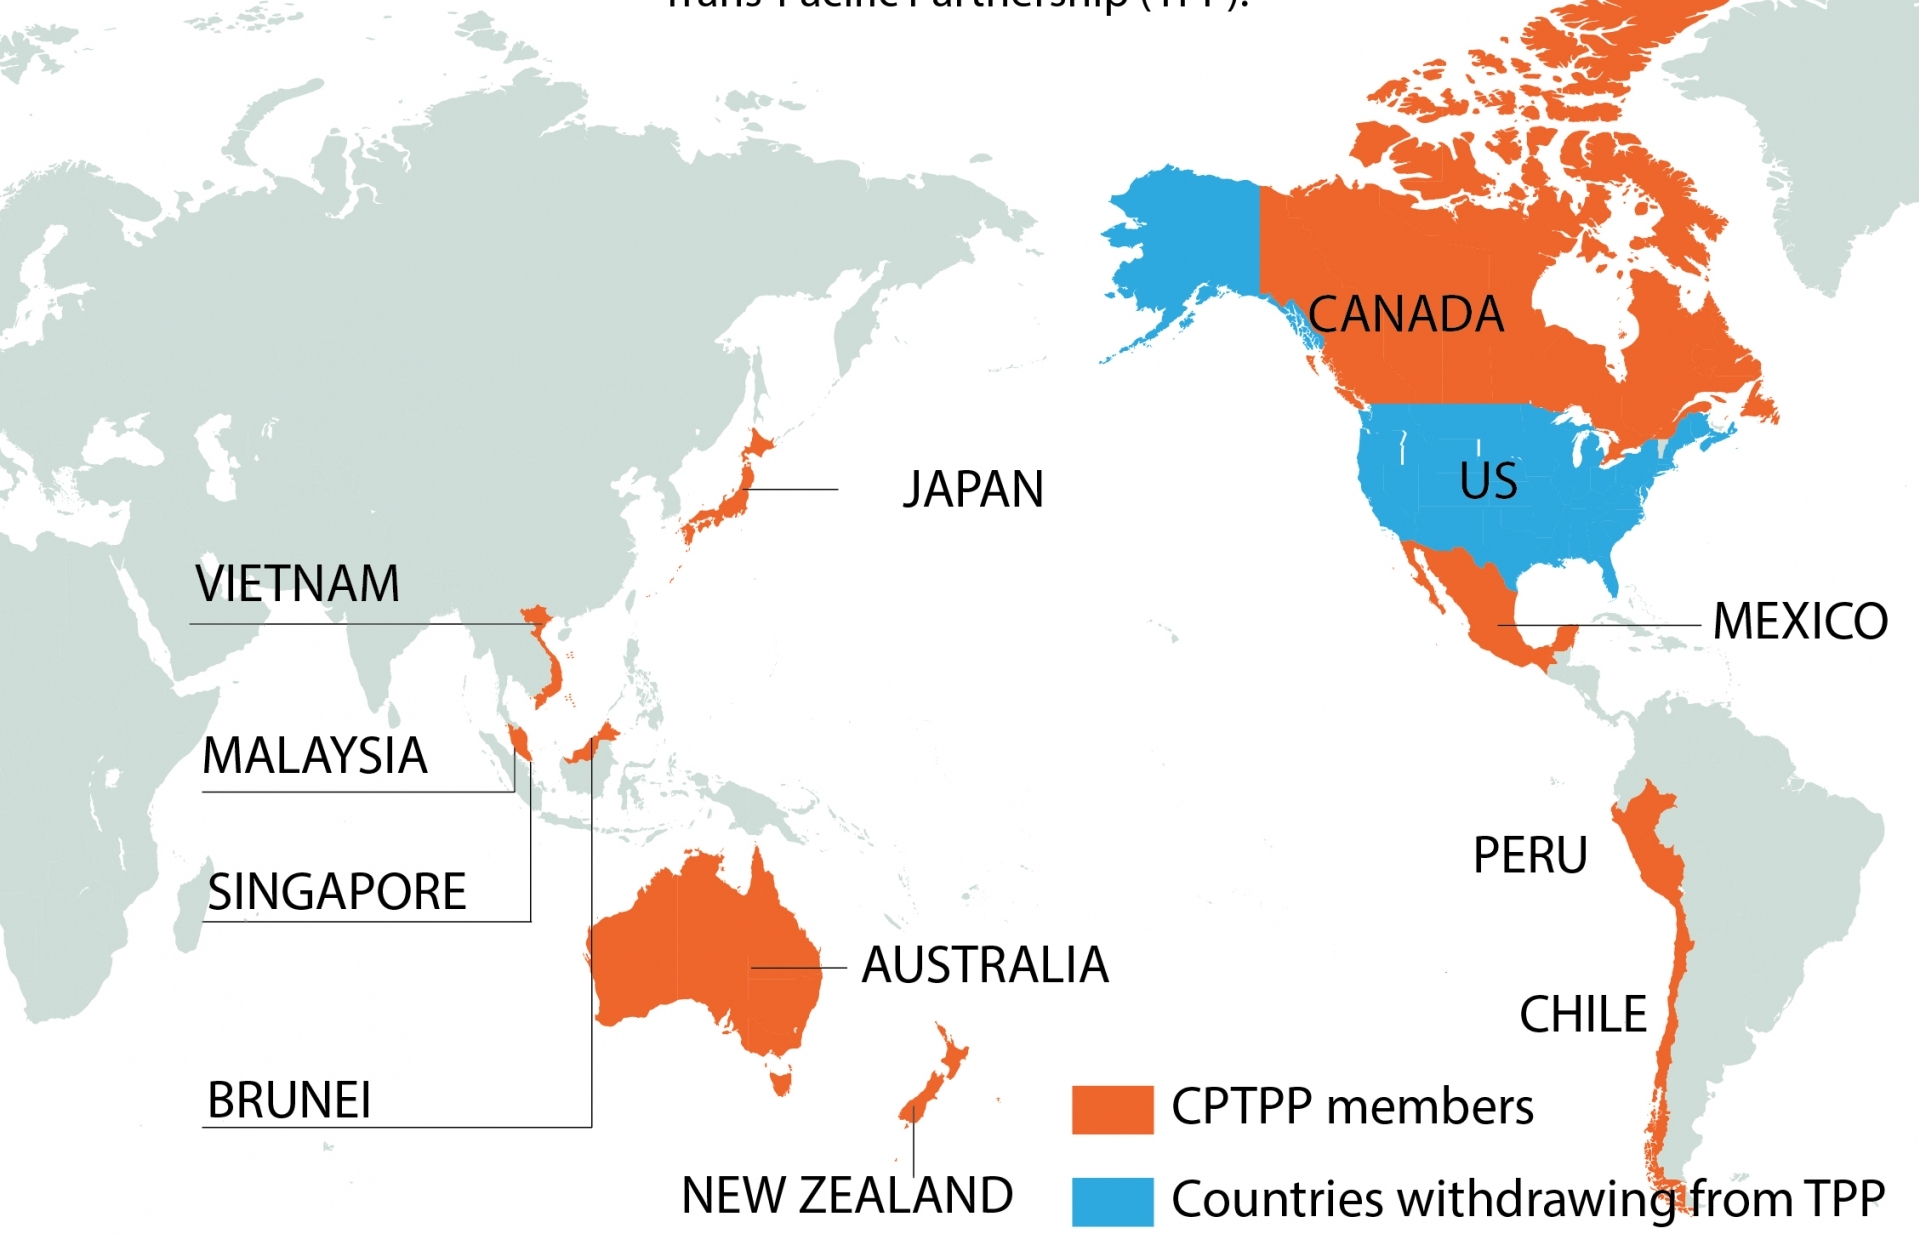 Differences between TPP and CPTPP